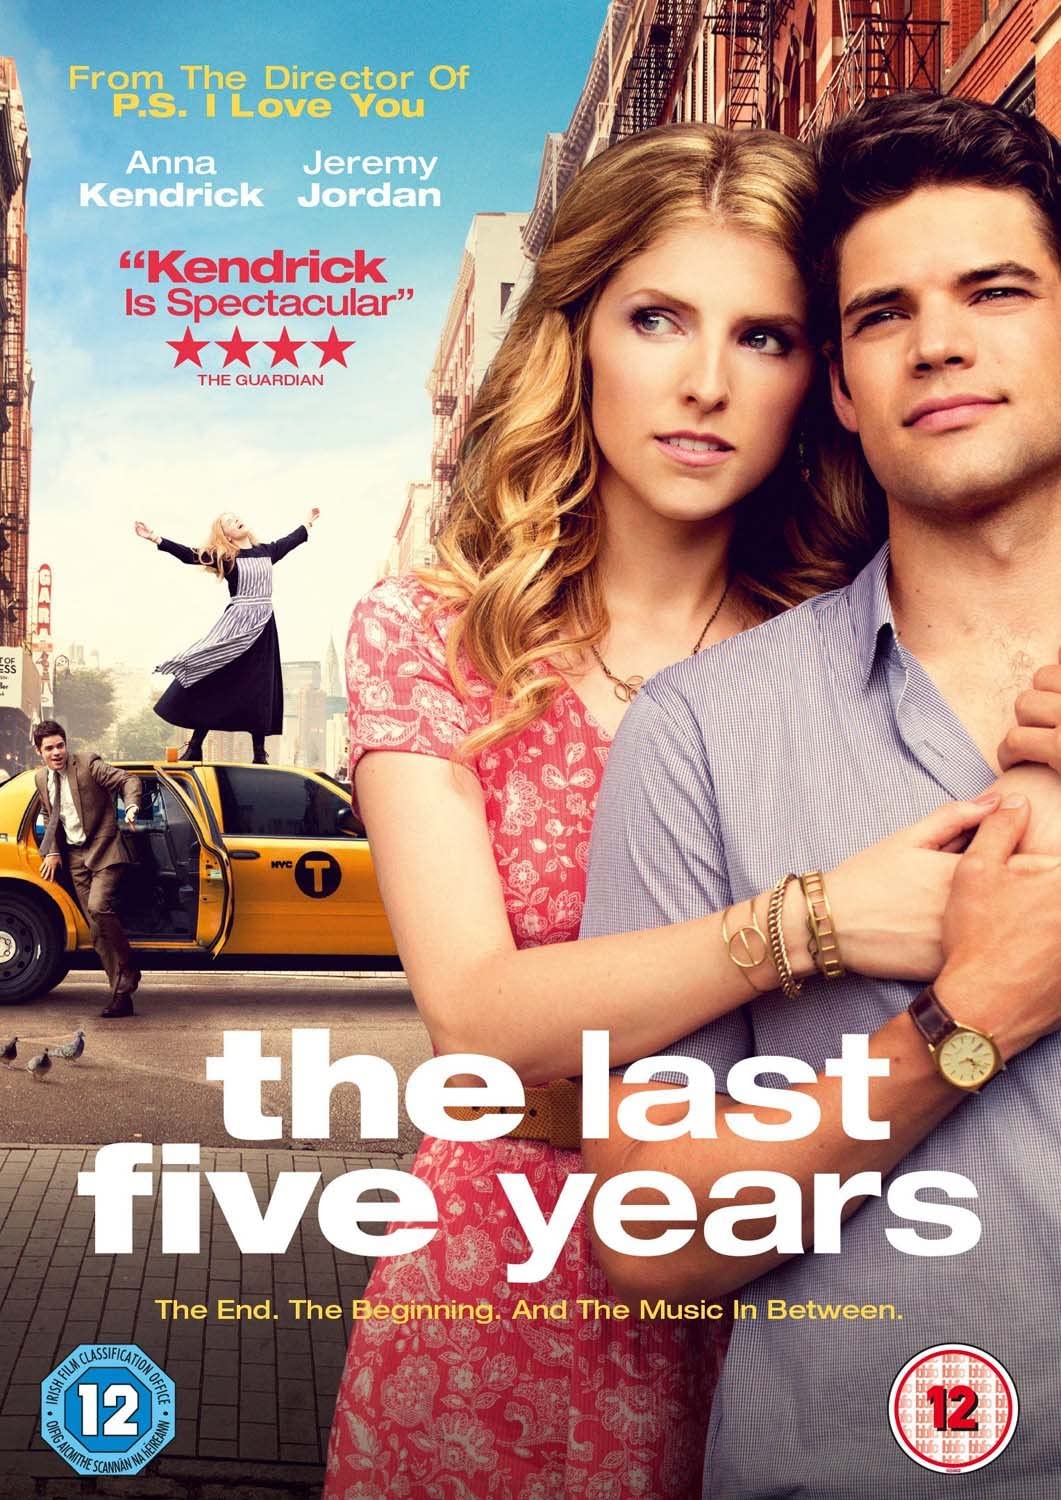 The Last Five Years - Musical/Romance [DVD]